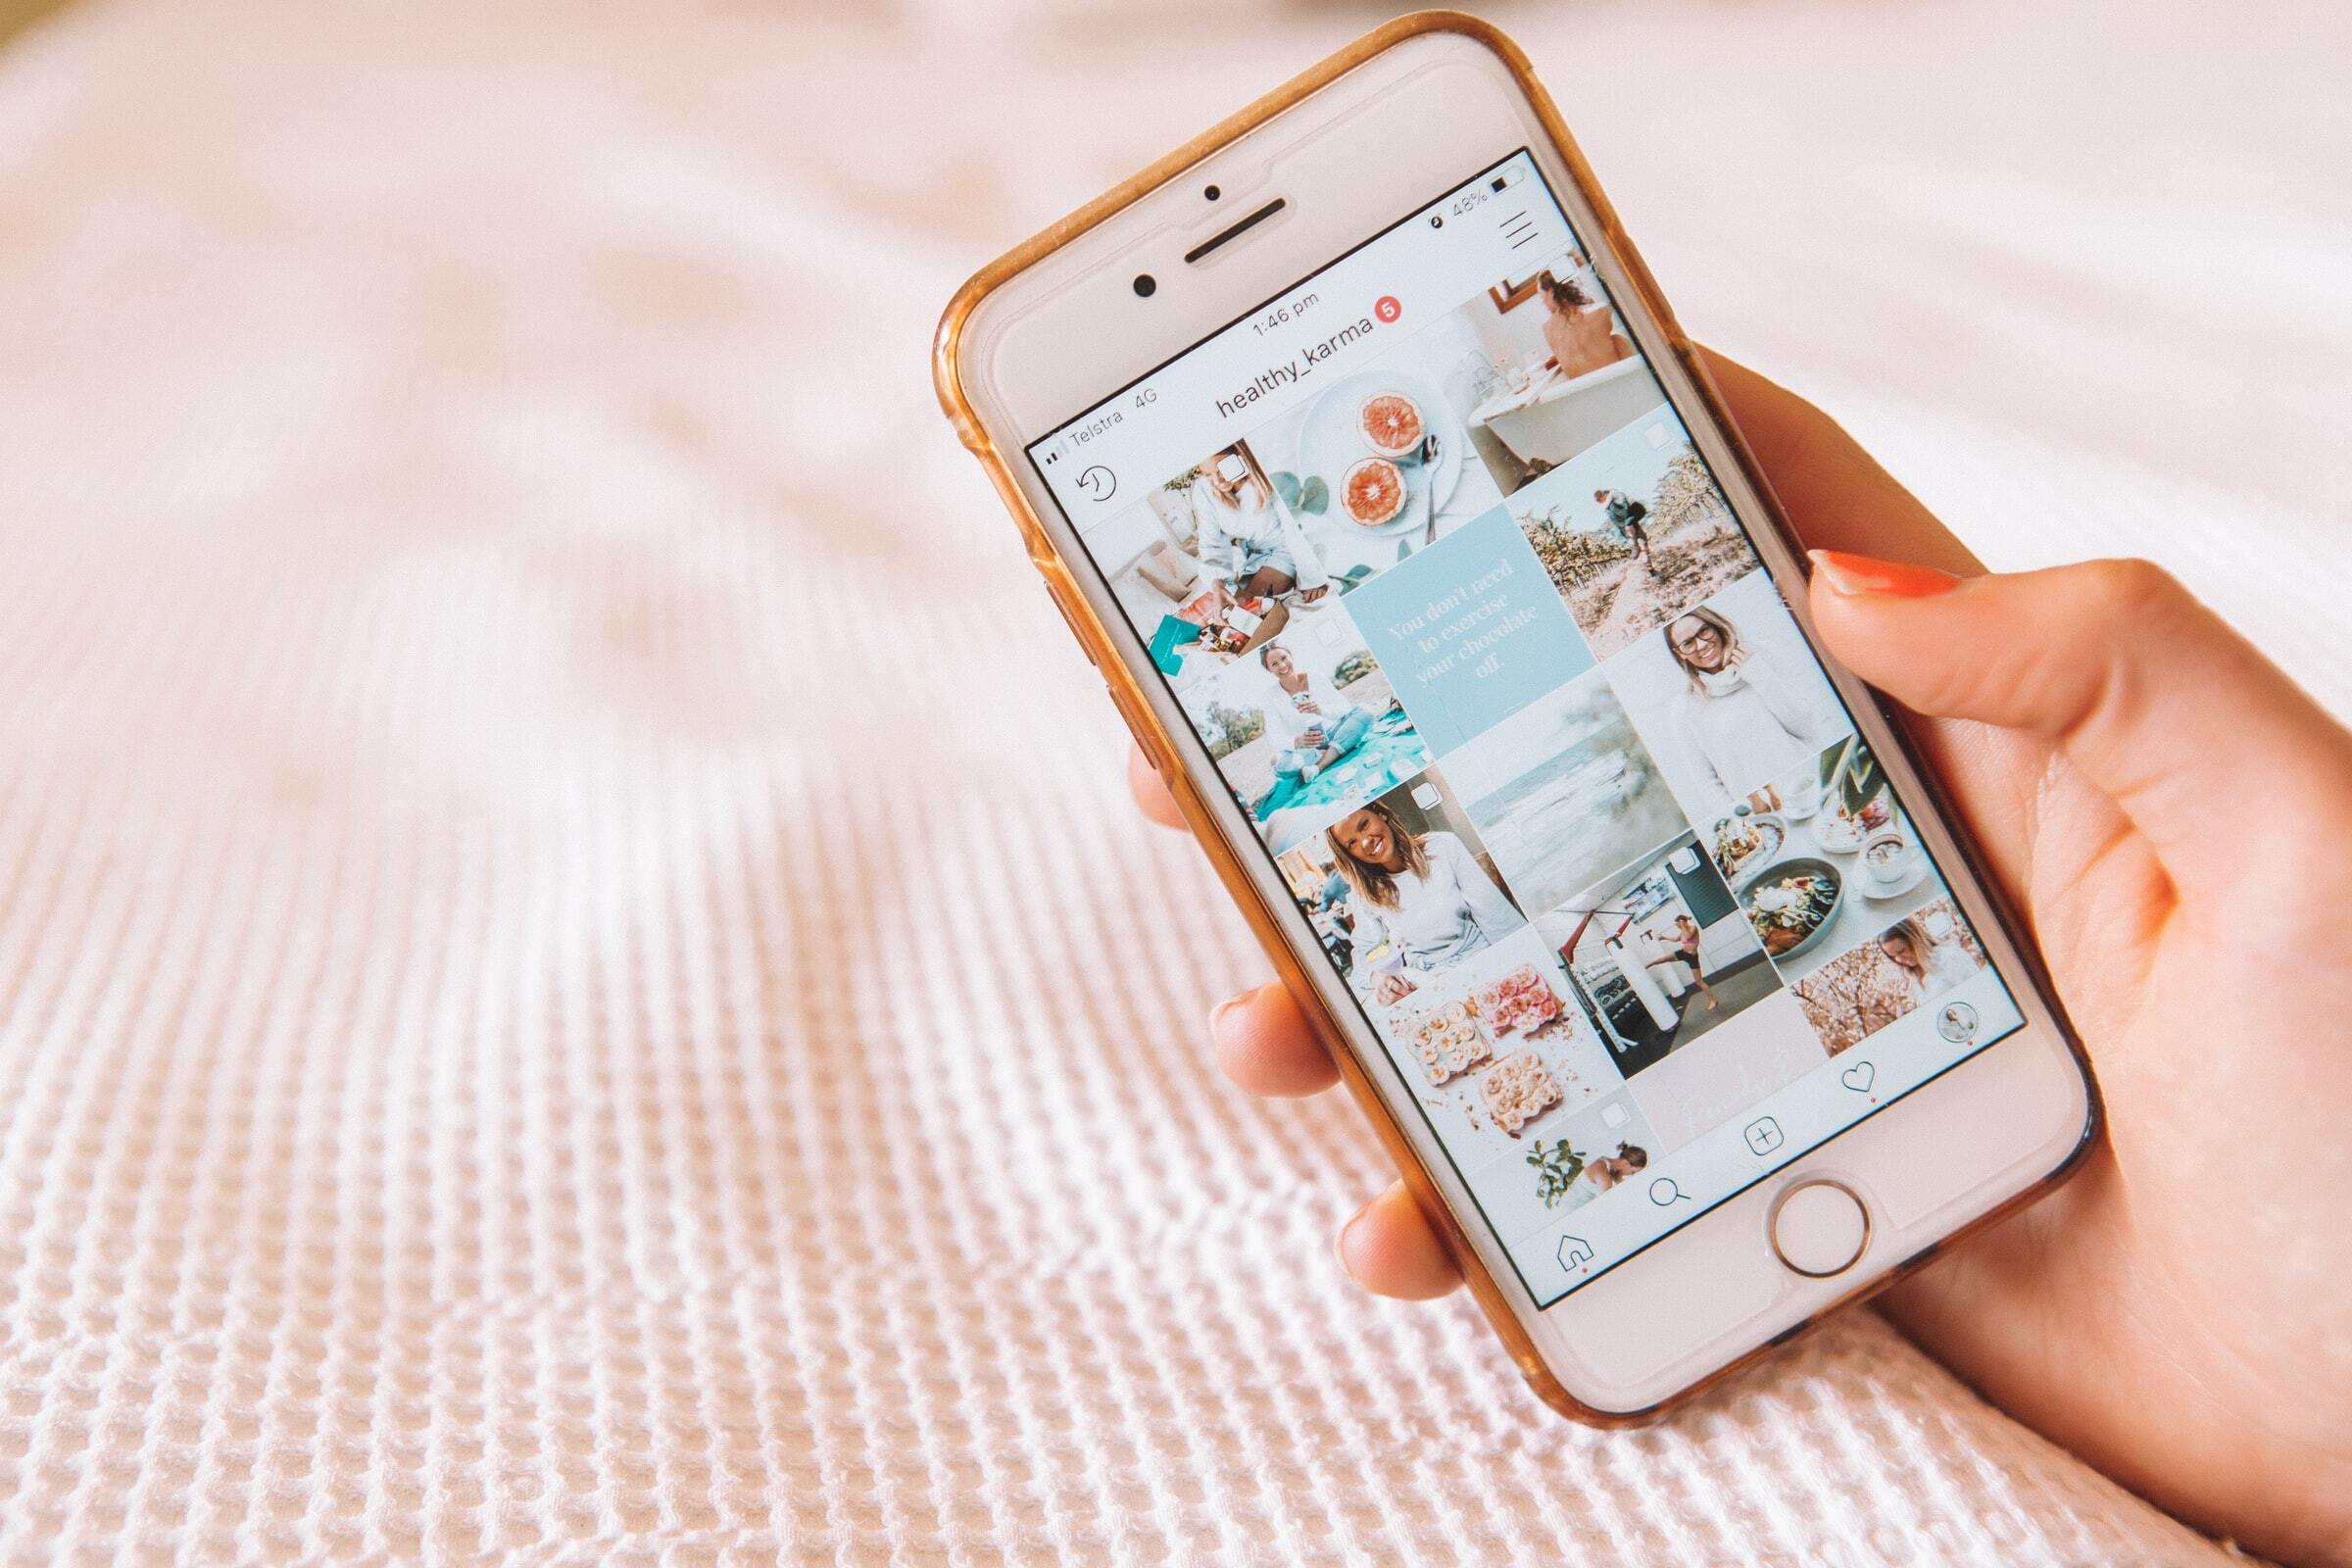 maddie bazzocco/unsplash - hand holding smartphone, screen has influencer inages - influencer pricing rates